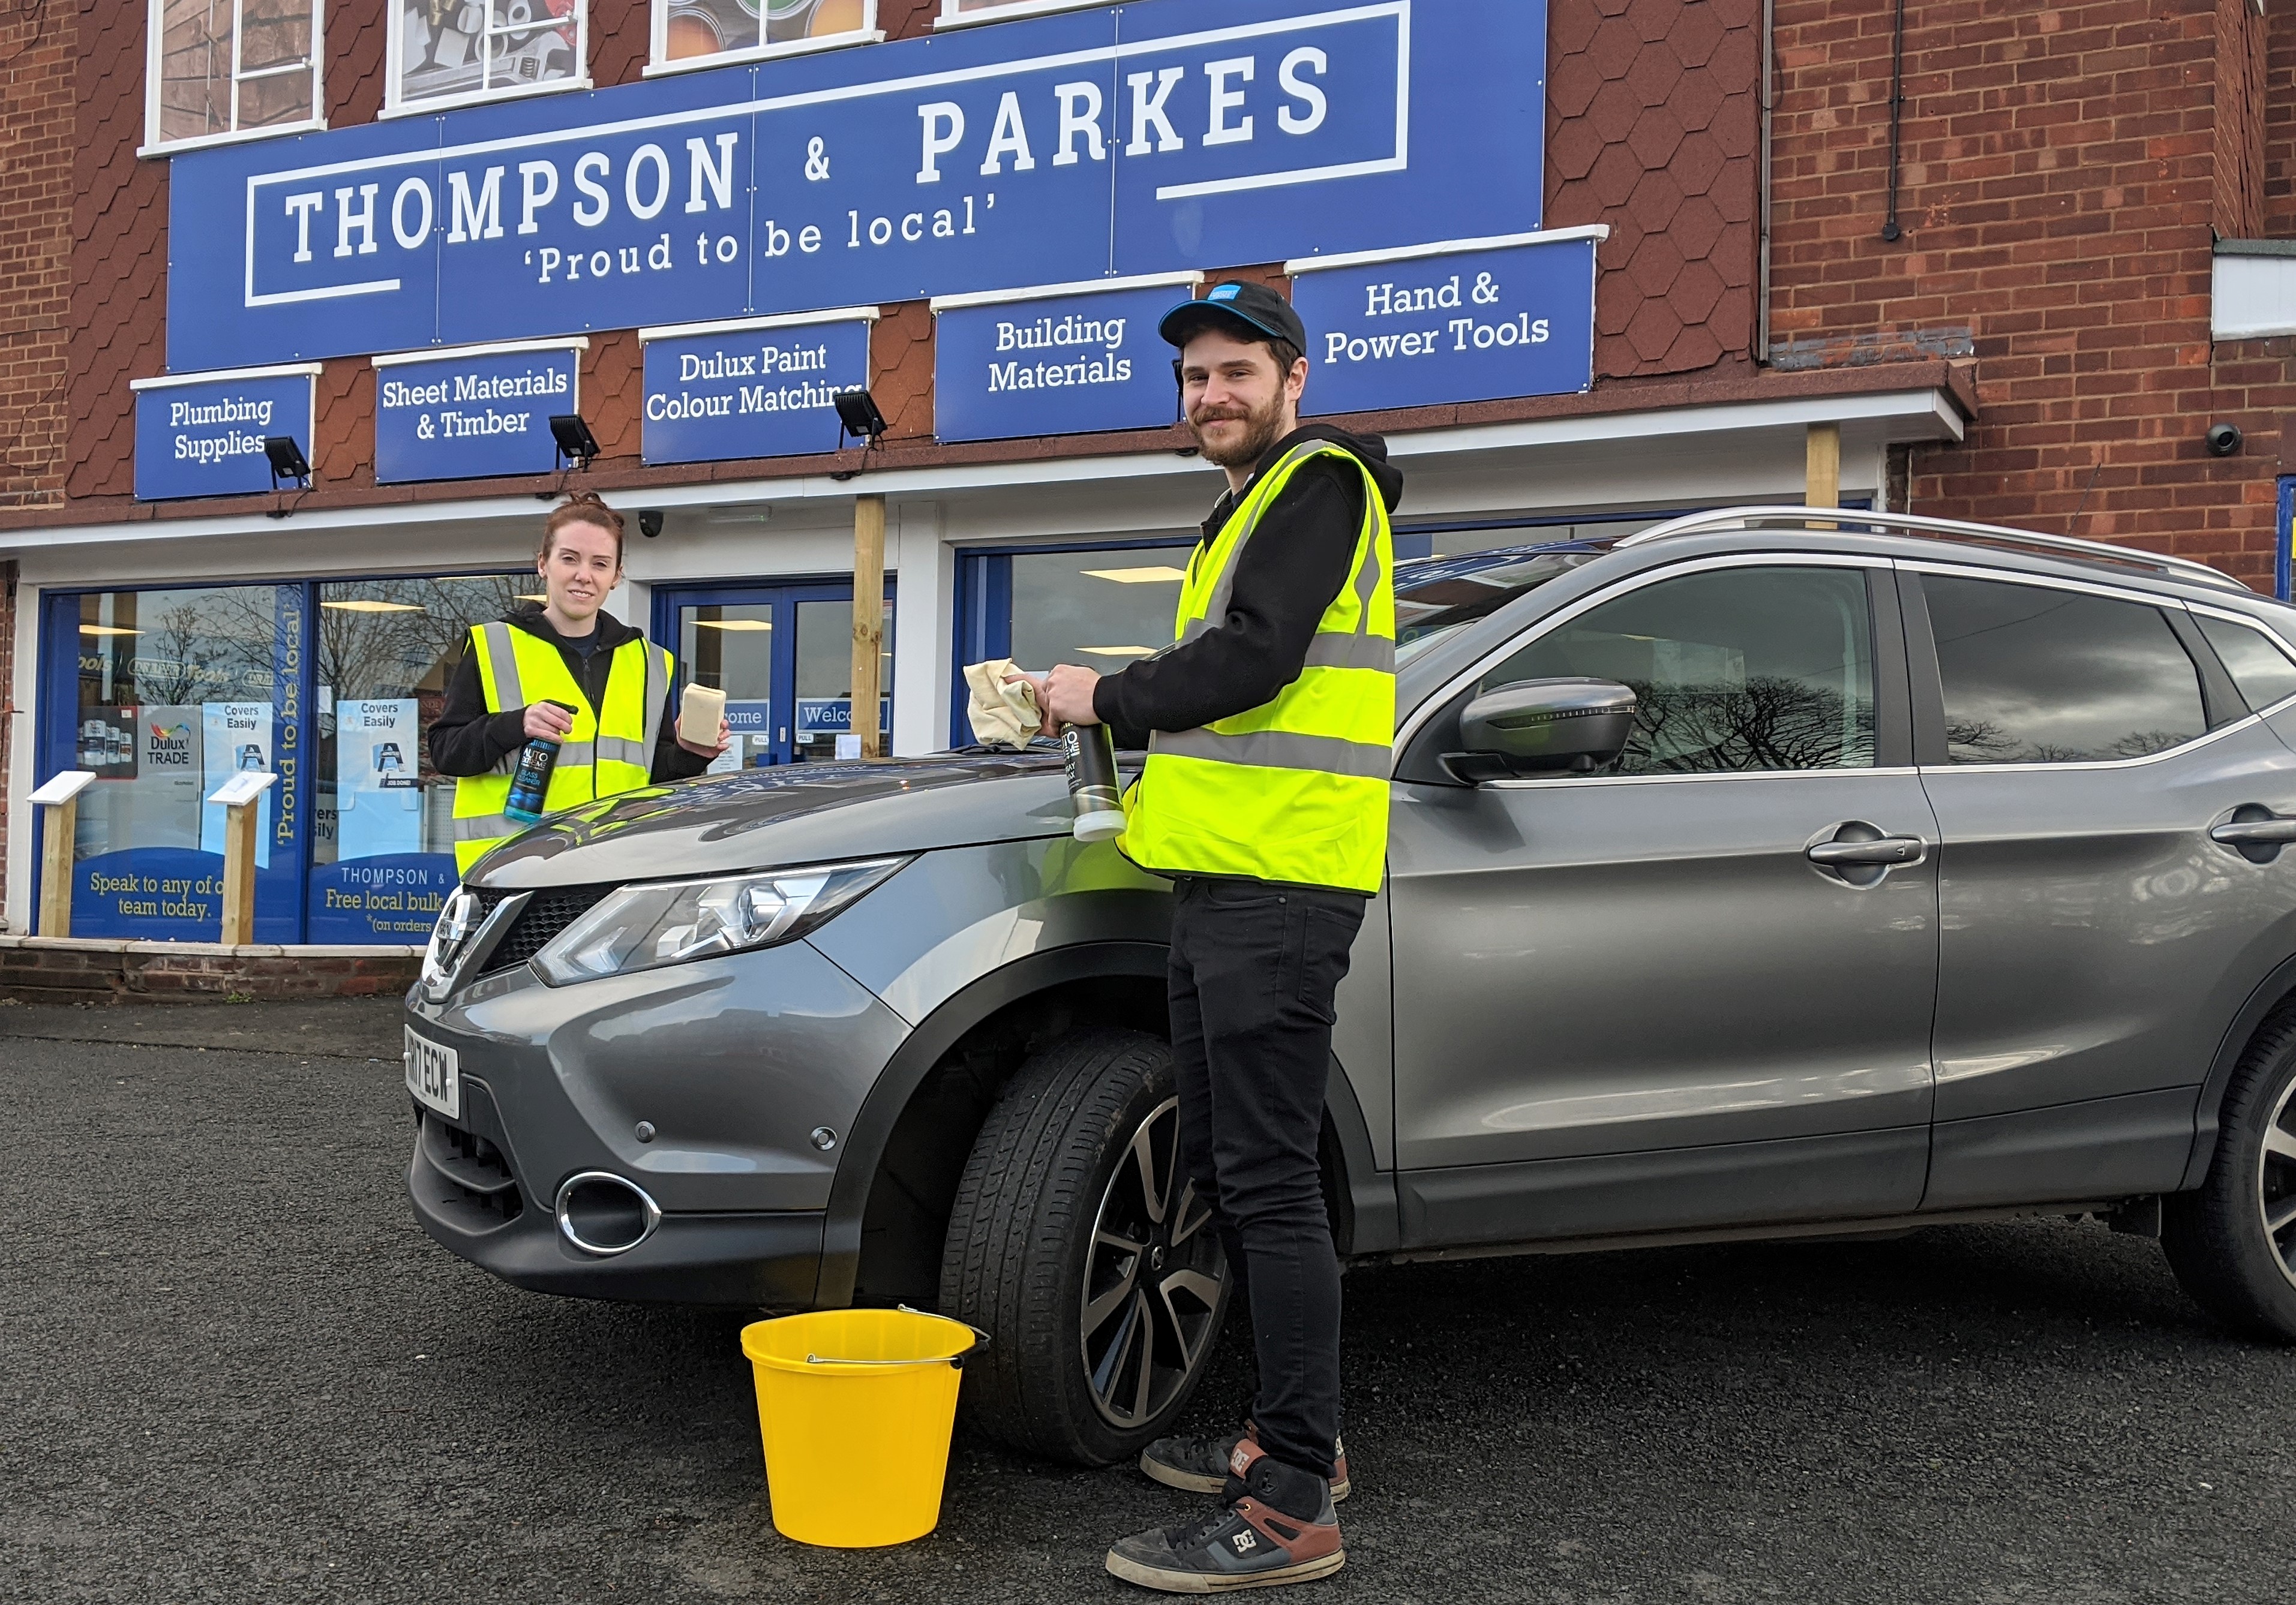 Thompson & Parkes Stourport Charity Car Wash in Aid of HELP!